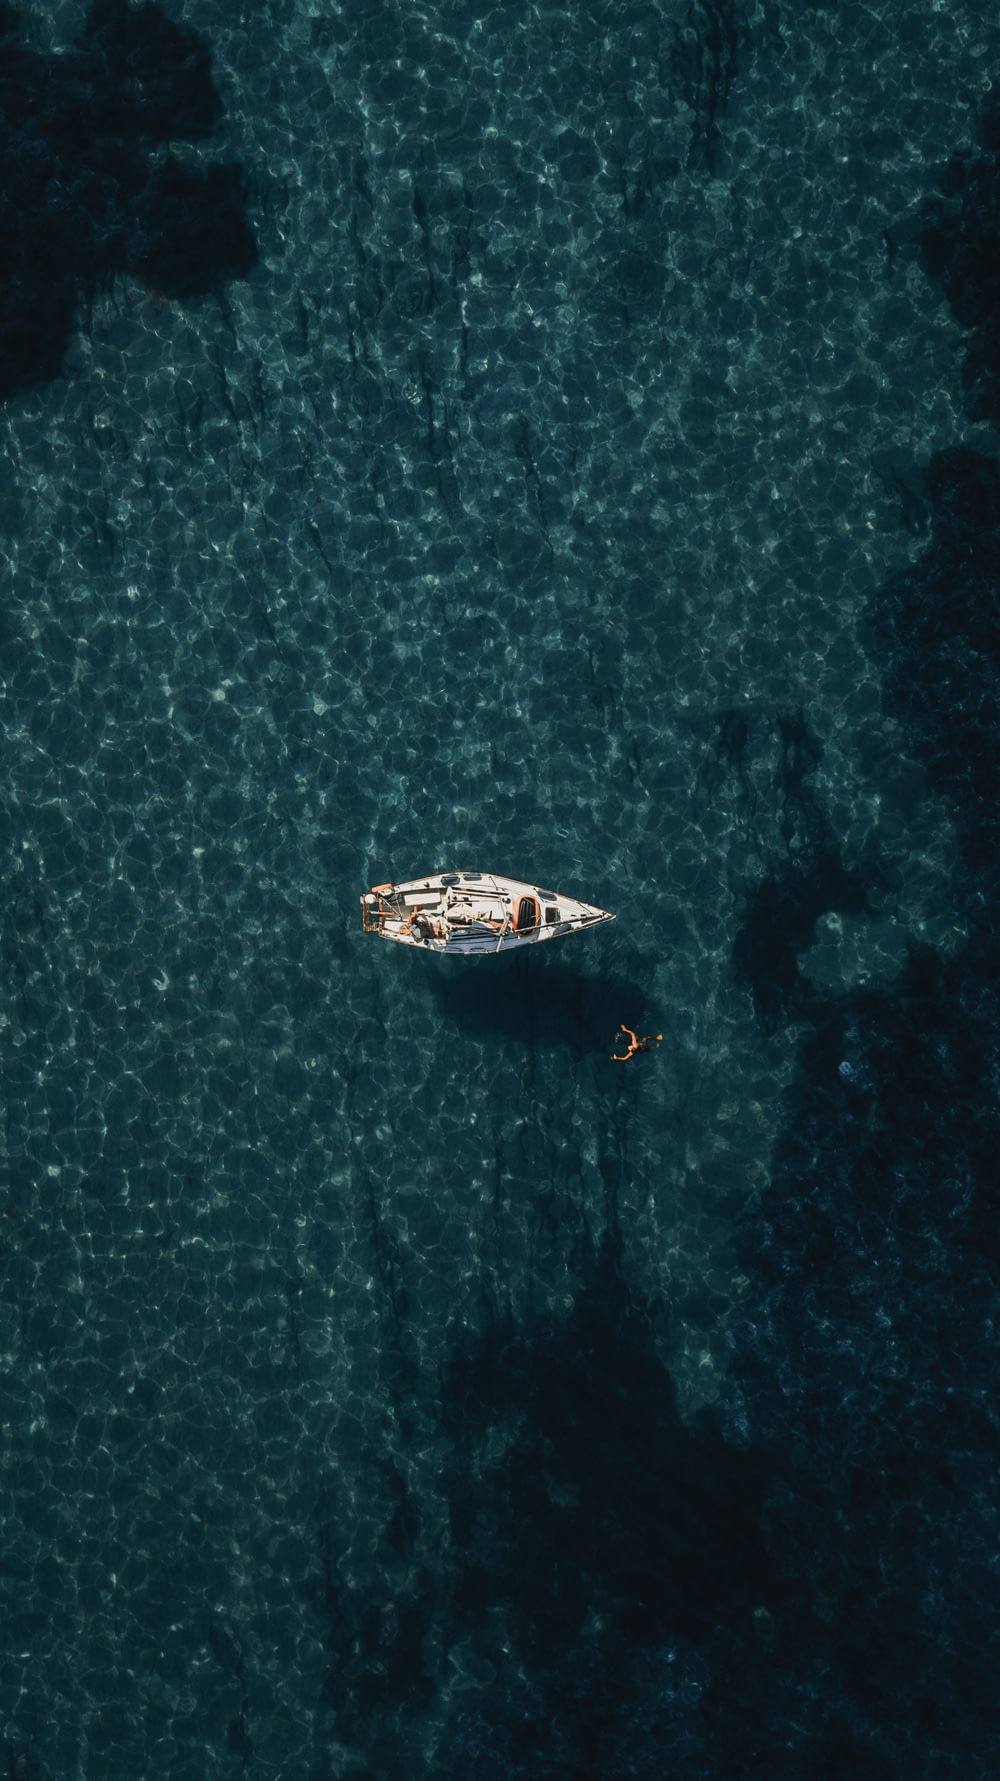 bird's-eye view of white boat on body of water